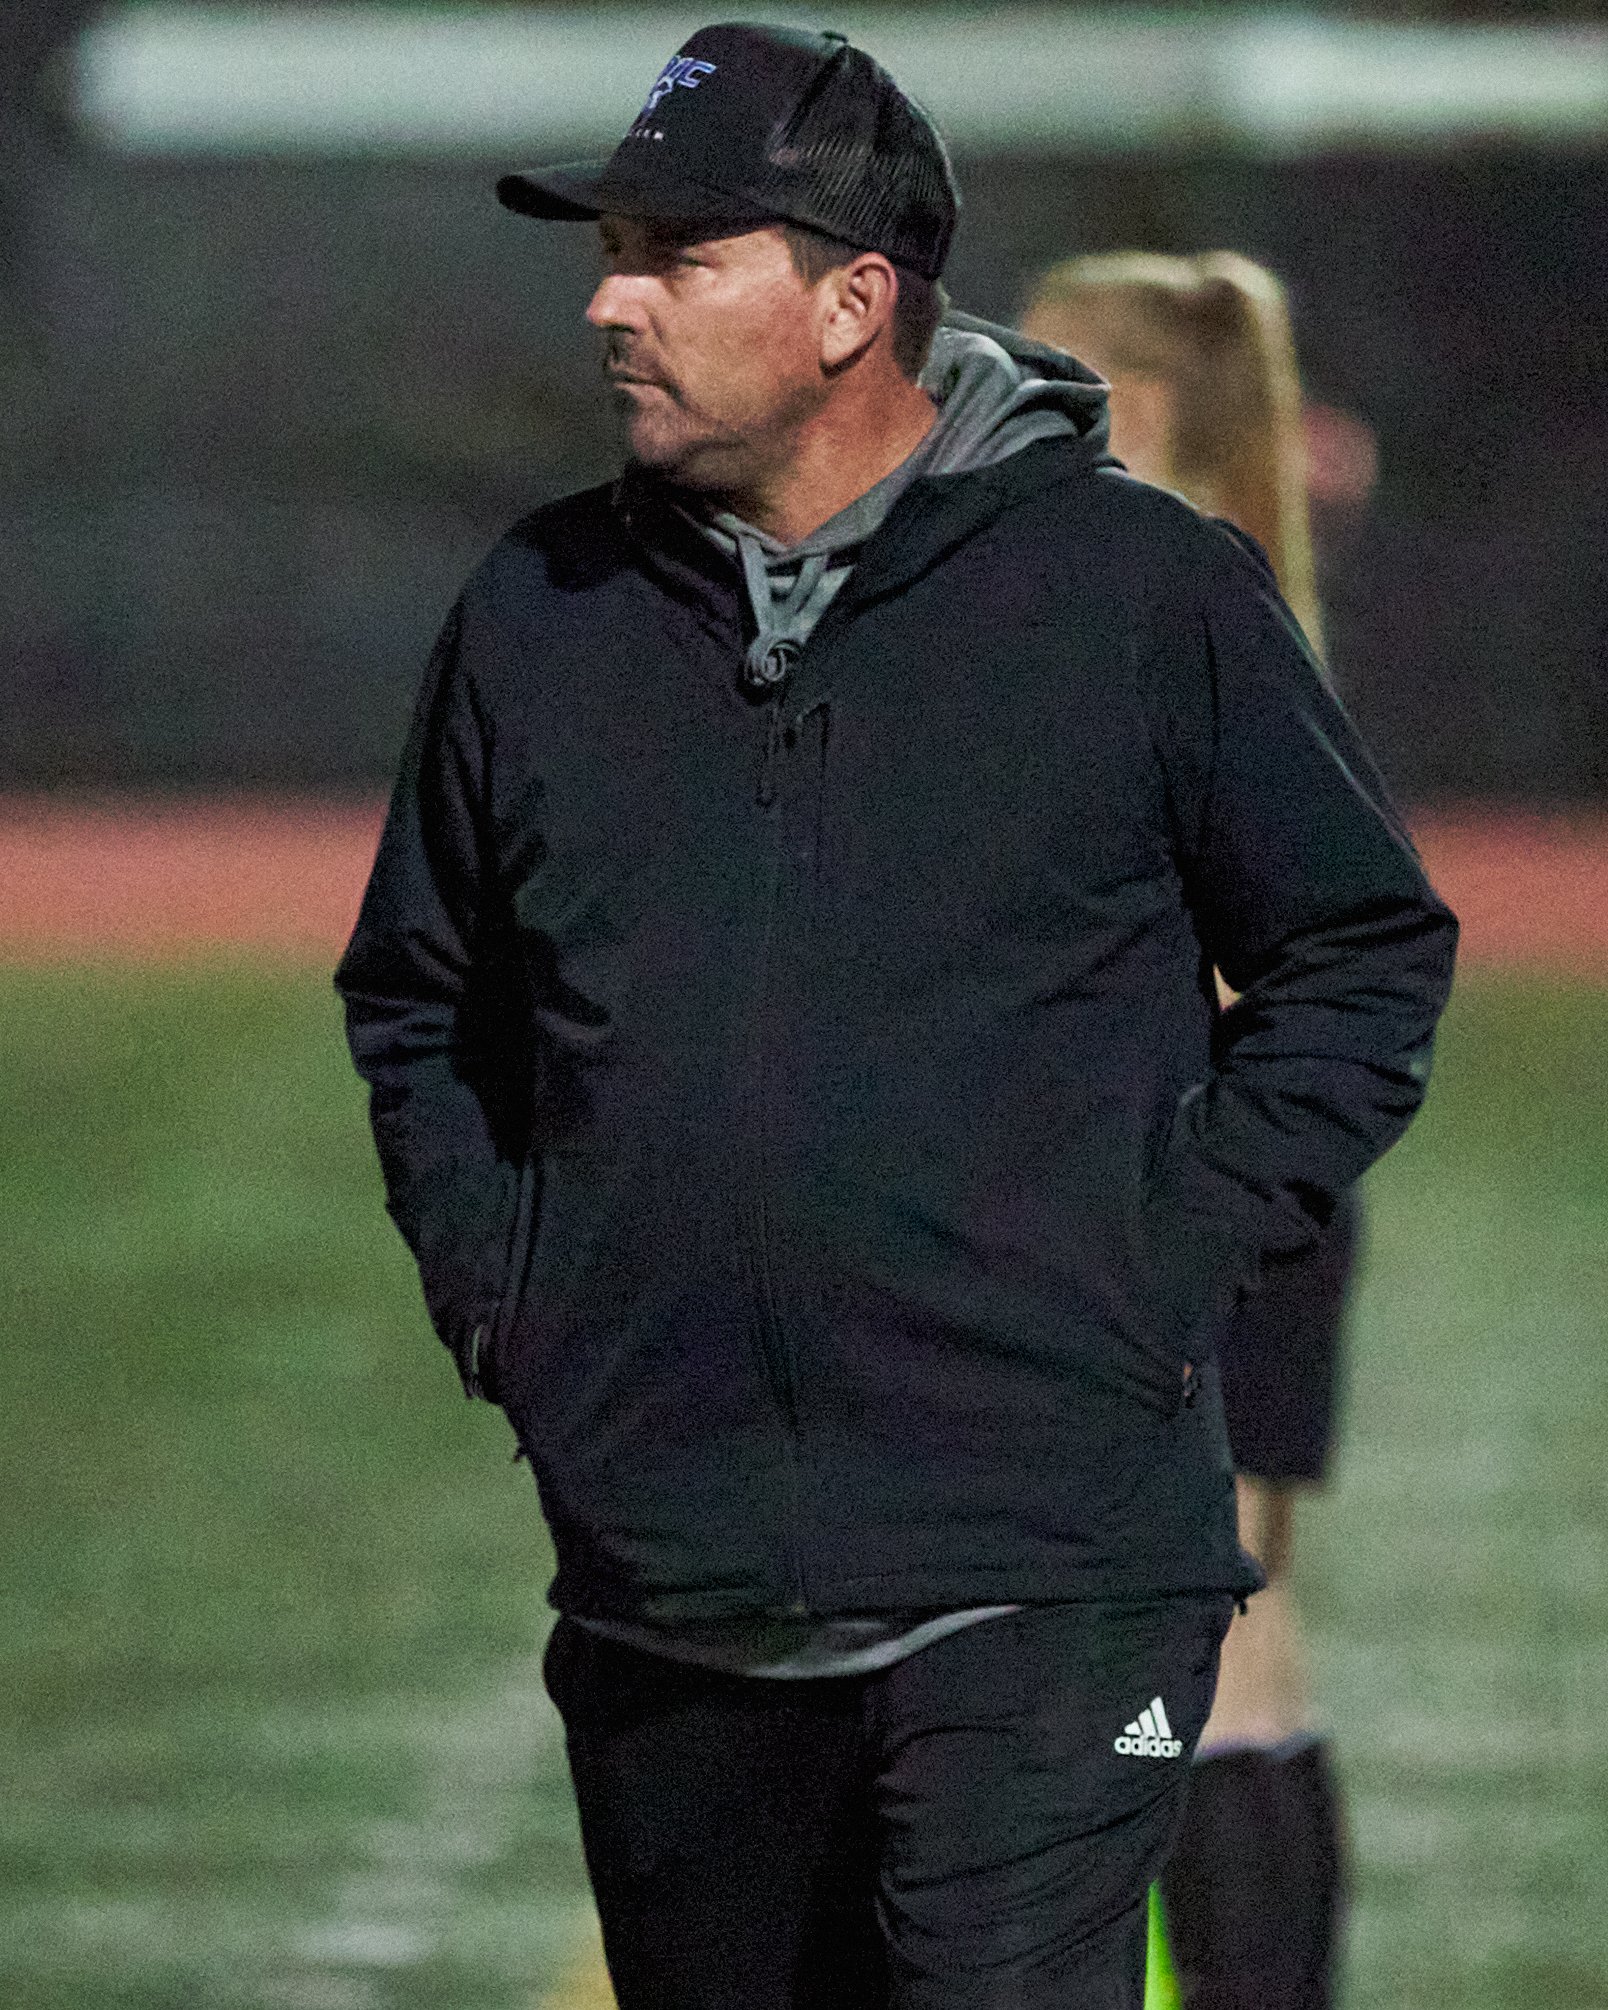  Santa Monica College Corsairs Women's Soccer Head Coach Aaron Benditson during the women's soccer match against the Bakersfield College Renegades on Wednesday, Nov. 16, 2022, at Corsair Field in Santa Monica, Calif. The Corsairs won 1-0. (Nicholas M